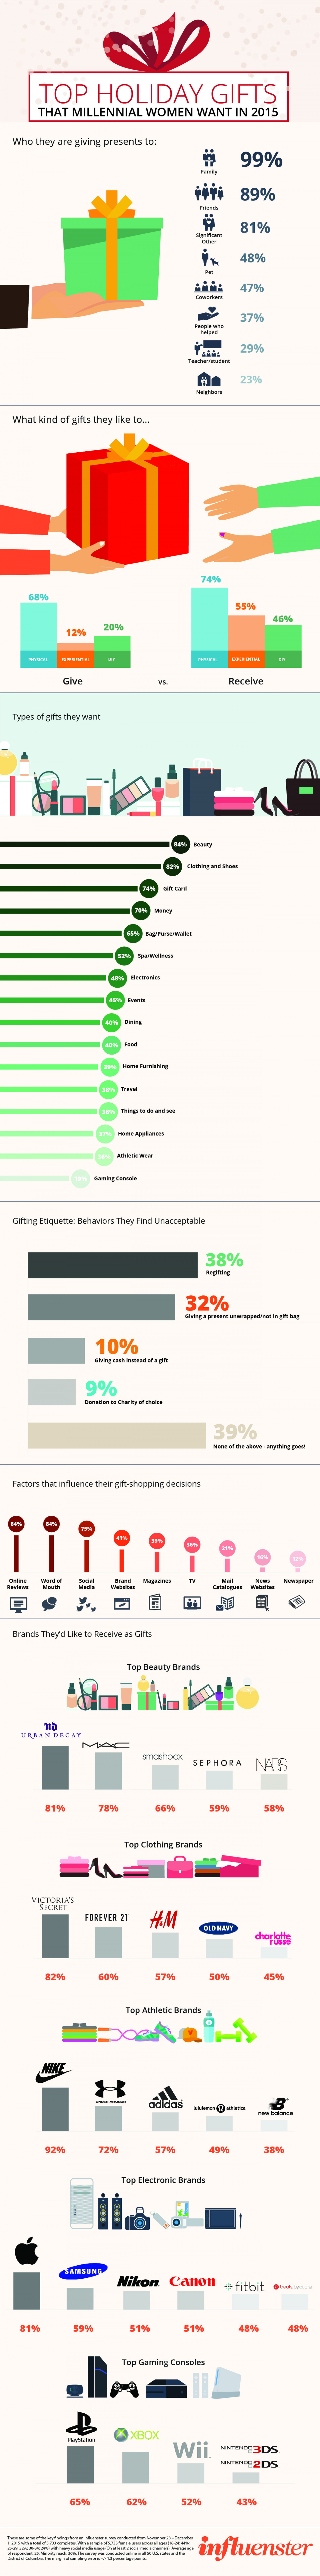 Top Holiday Gifts that Millennial Women Want in 2015 Infographic